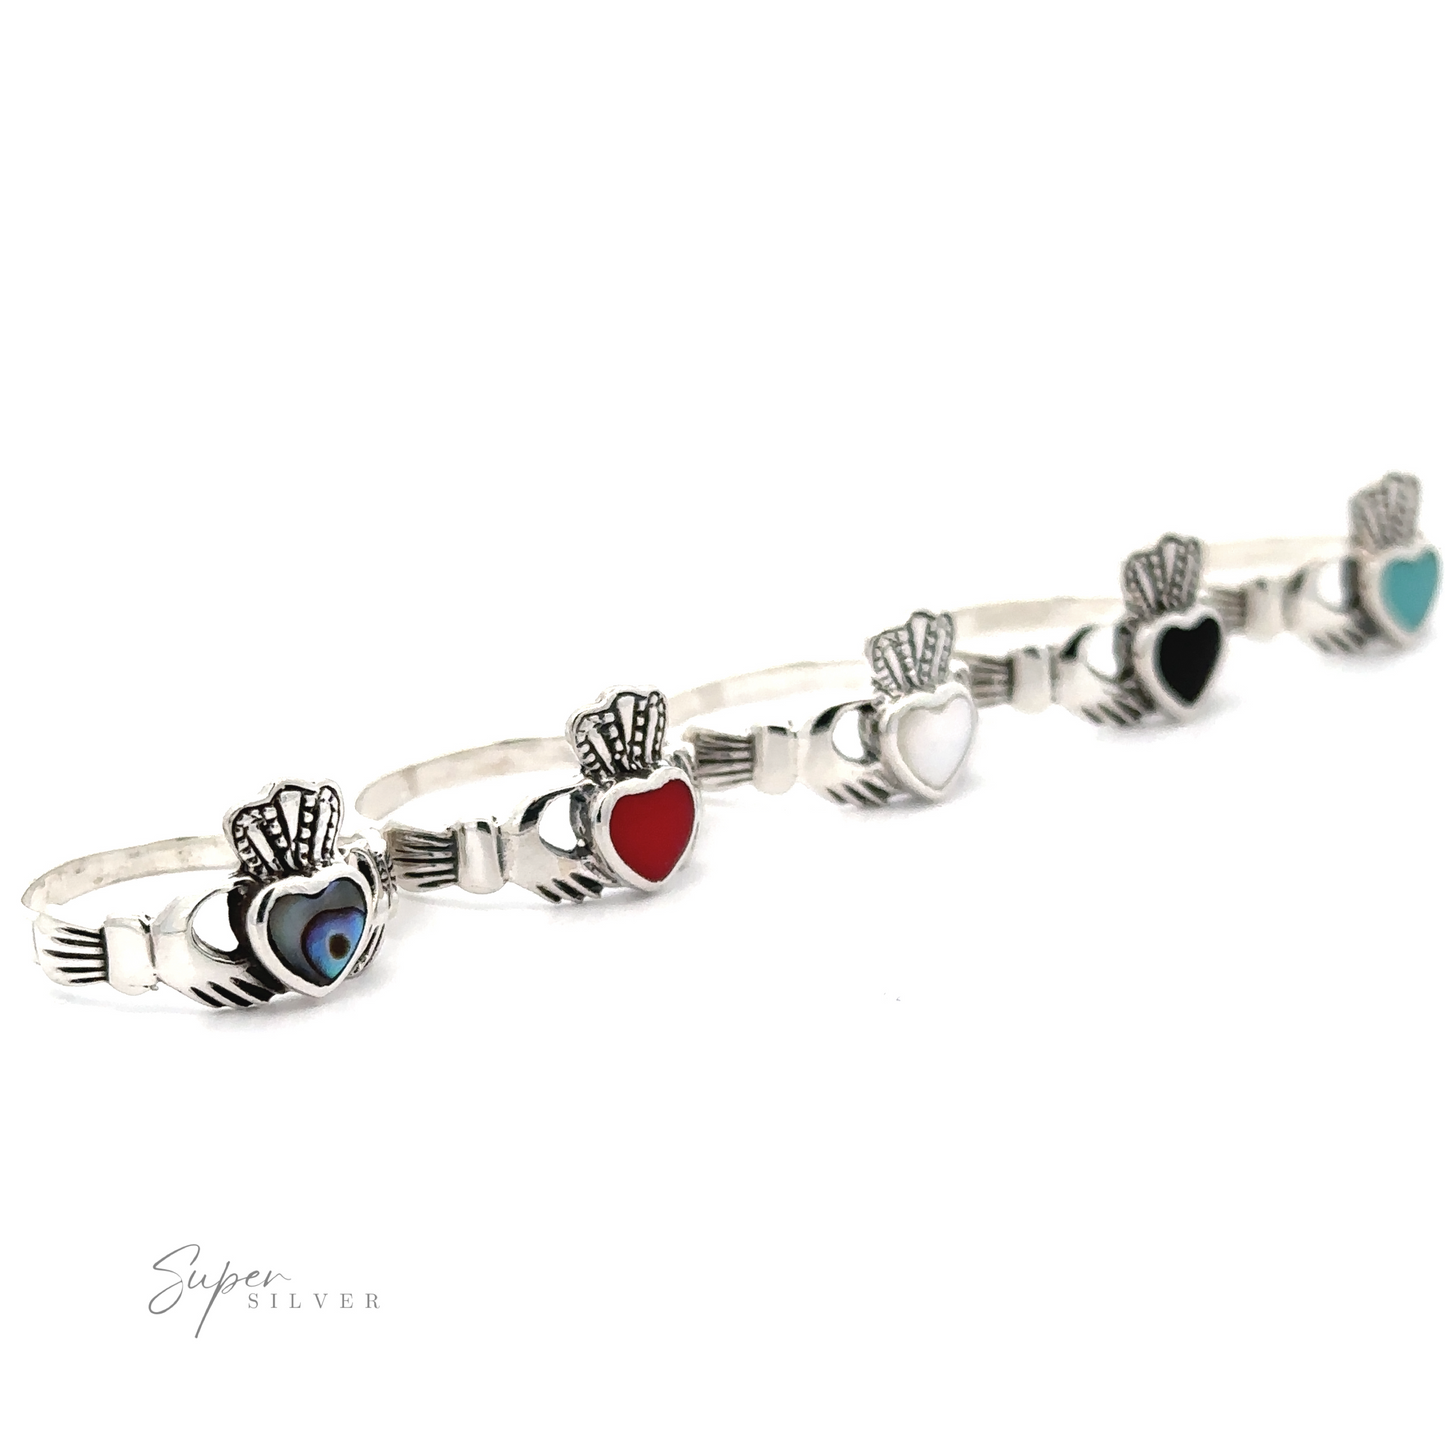 
                  
                    A silver bracelet inspired by the Claddagh Inlaid Stone Ring, featuring decorative hands with heart-shaped and variously colored gems in the palms, displayed on a white background.
                  
                